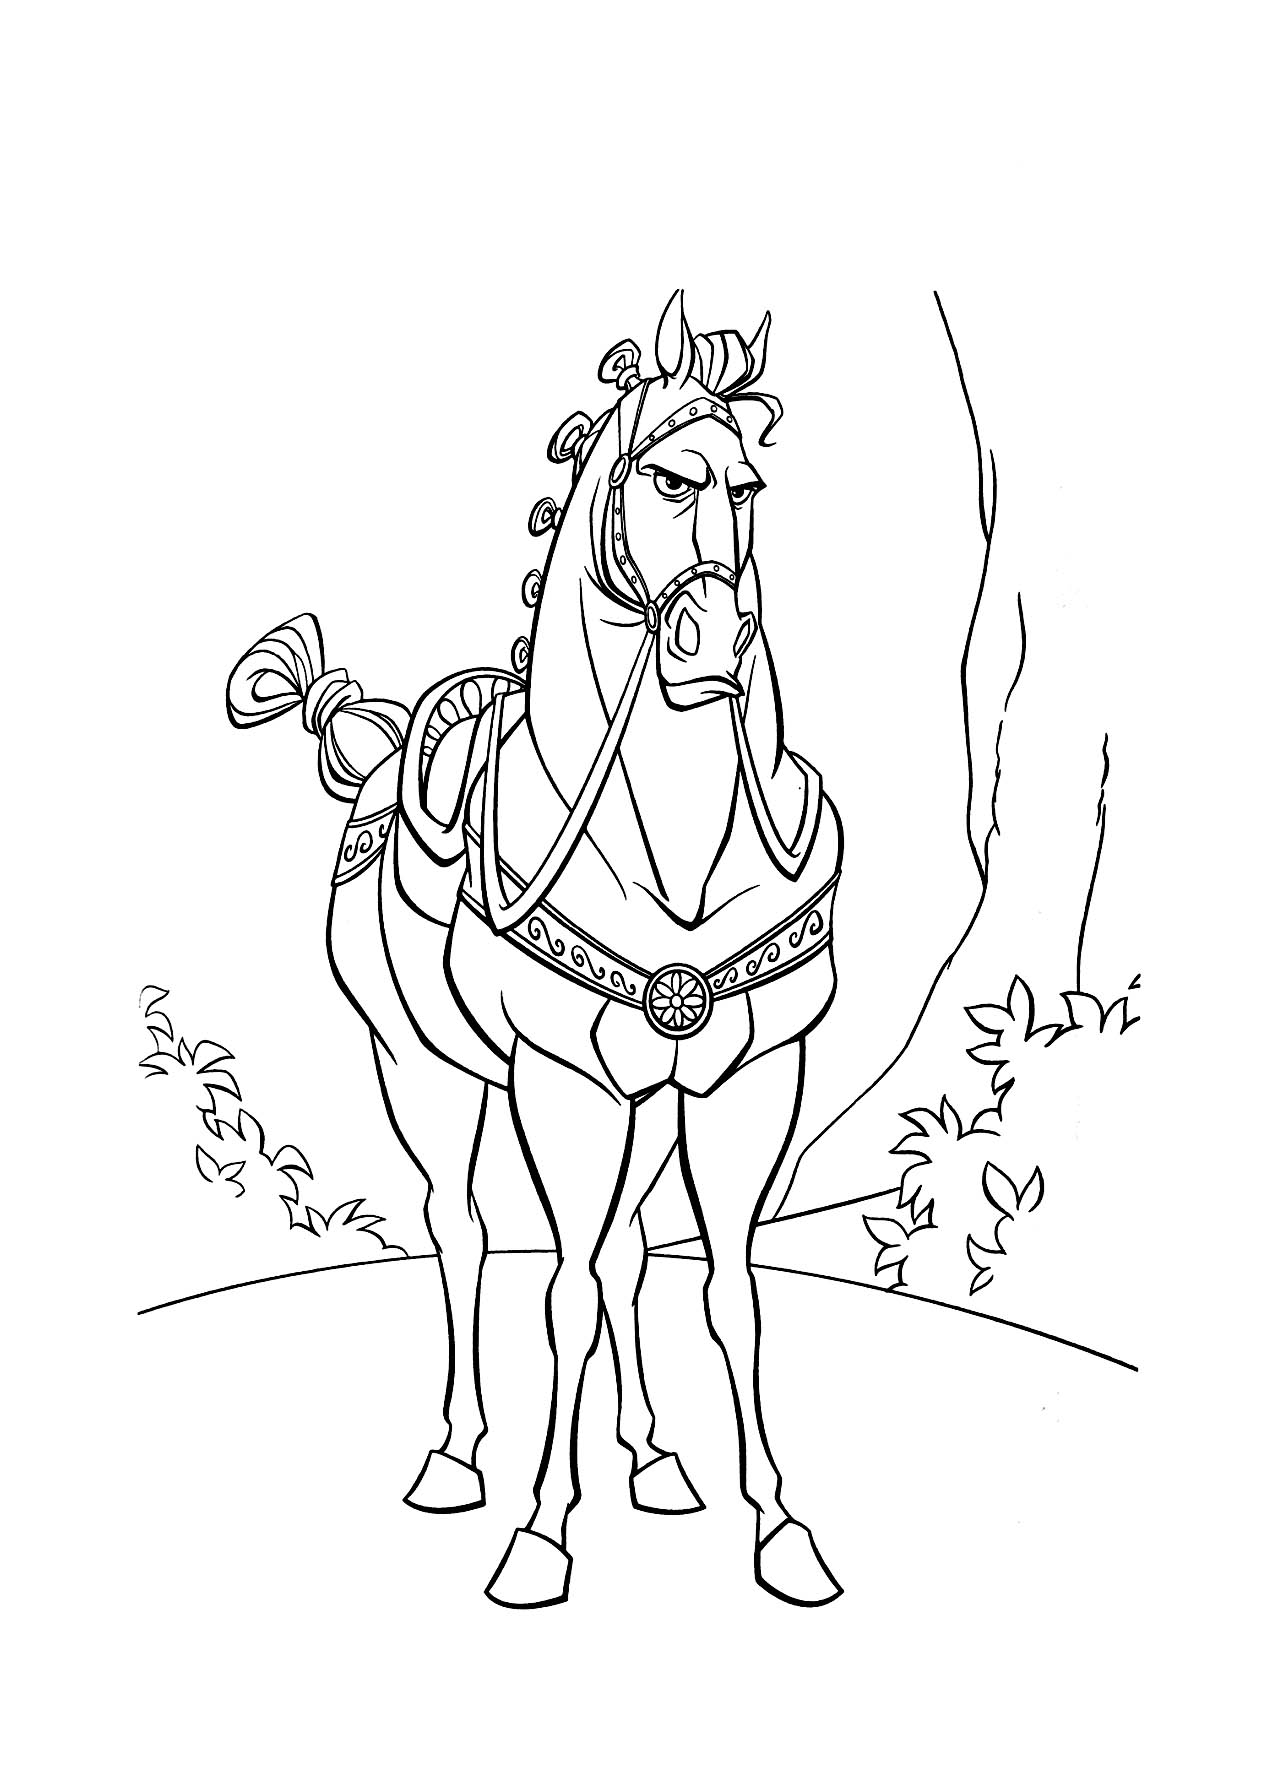 Simple Tangled coloring page for children with a horse